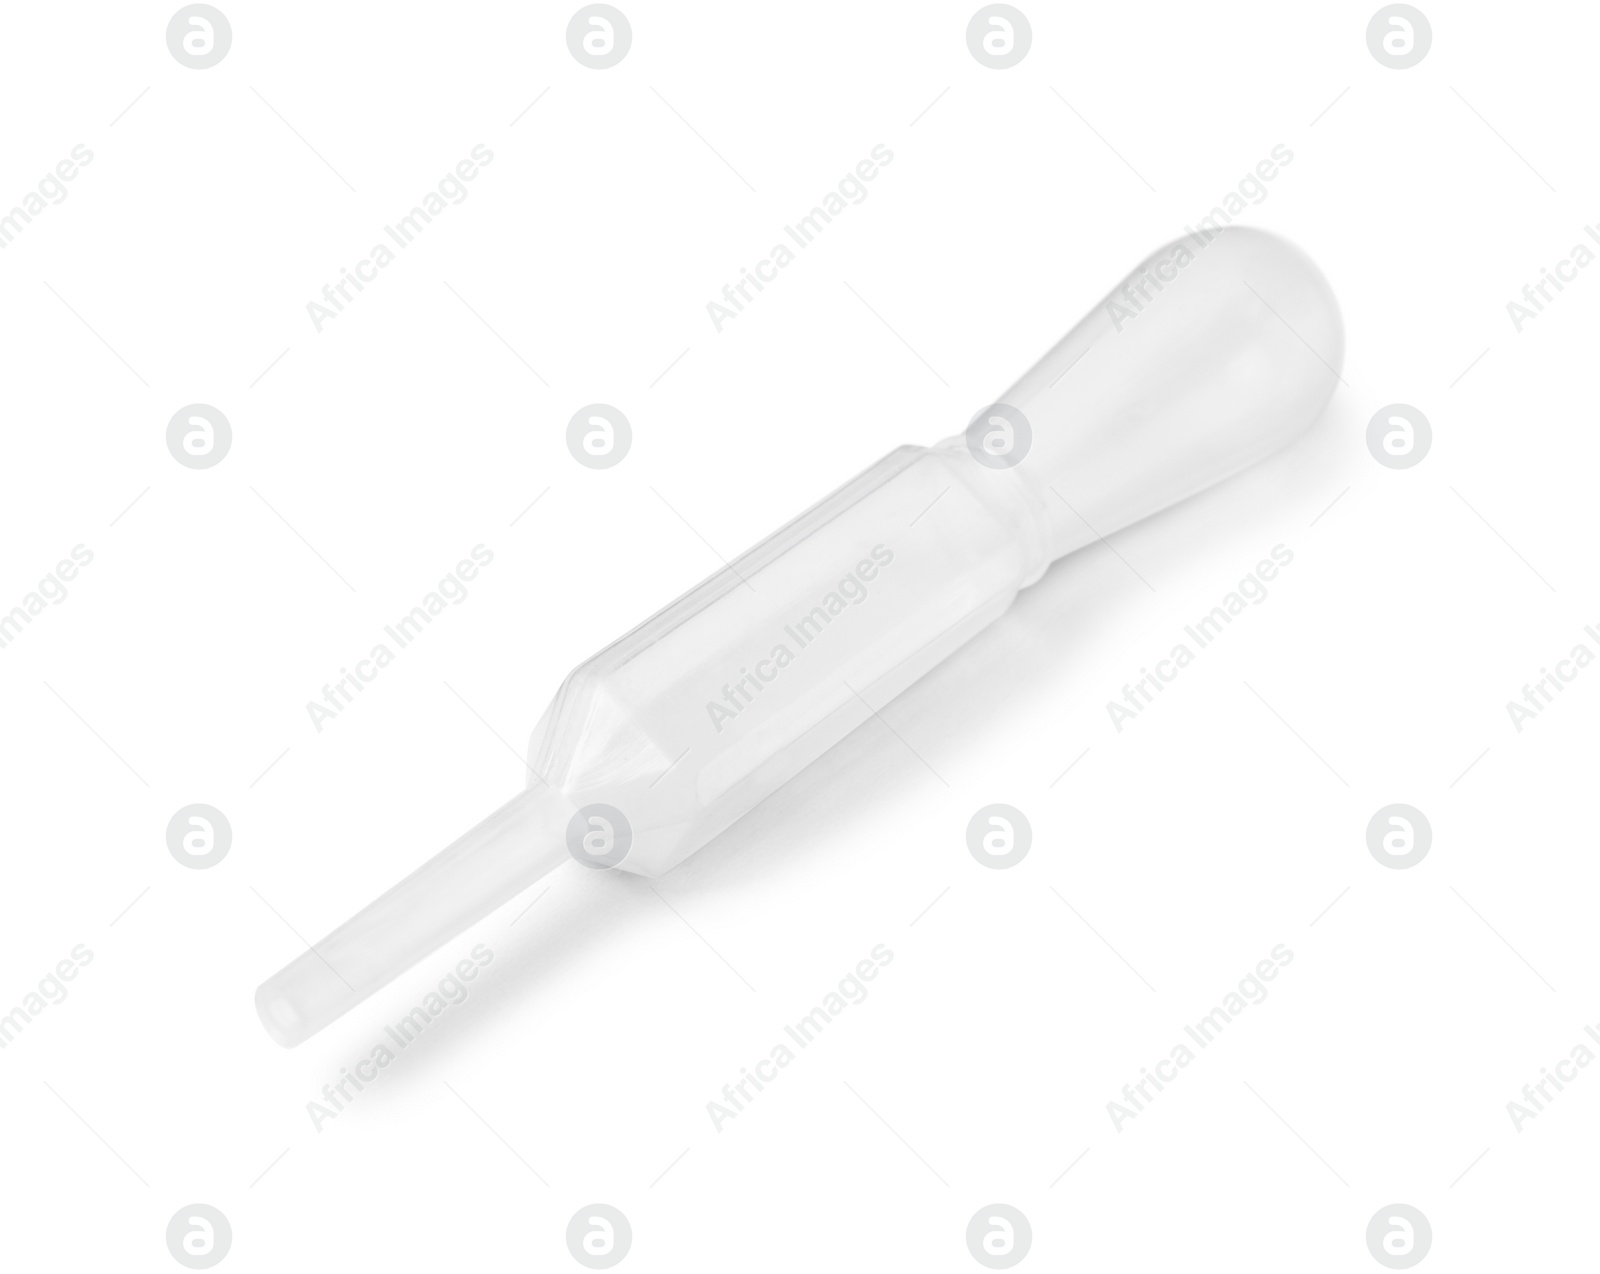 Photo of One clean transparent pipette isolated on white